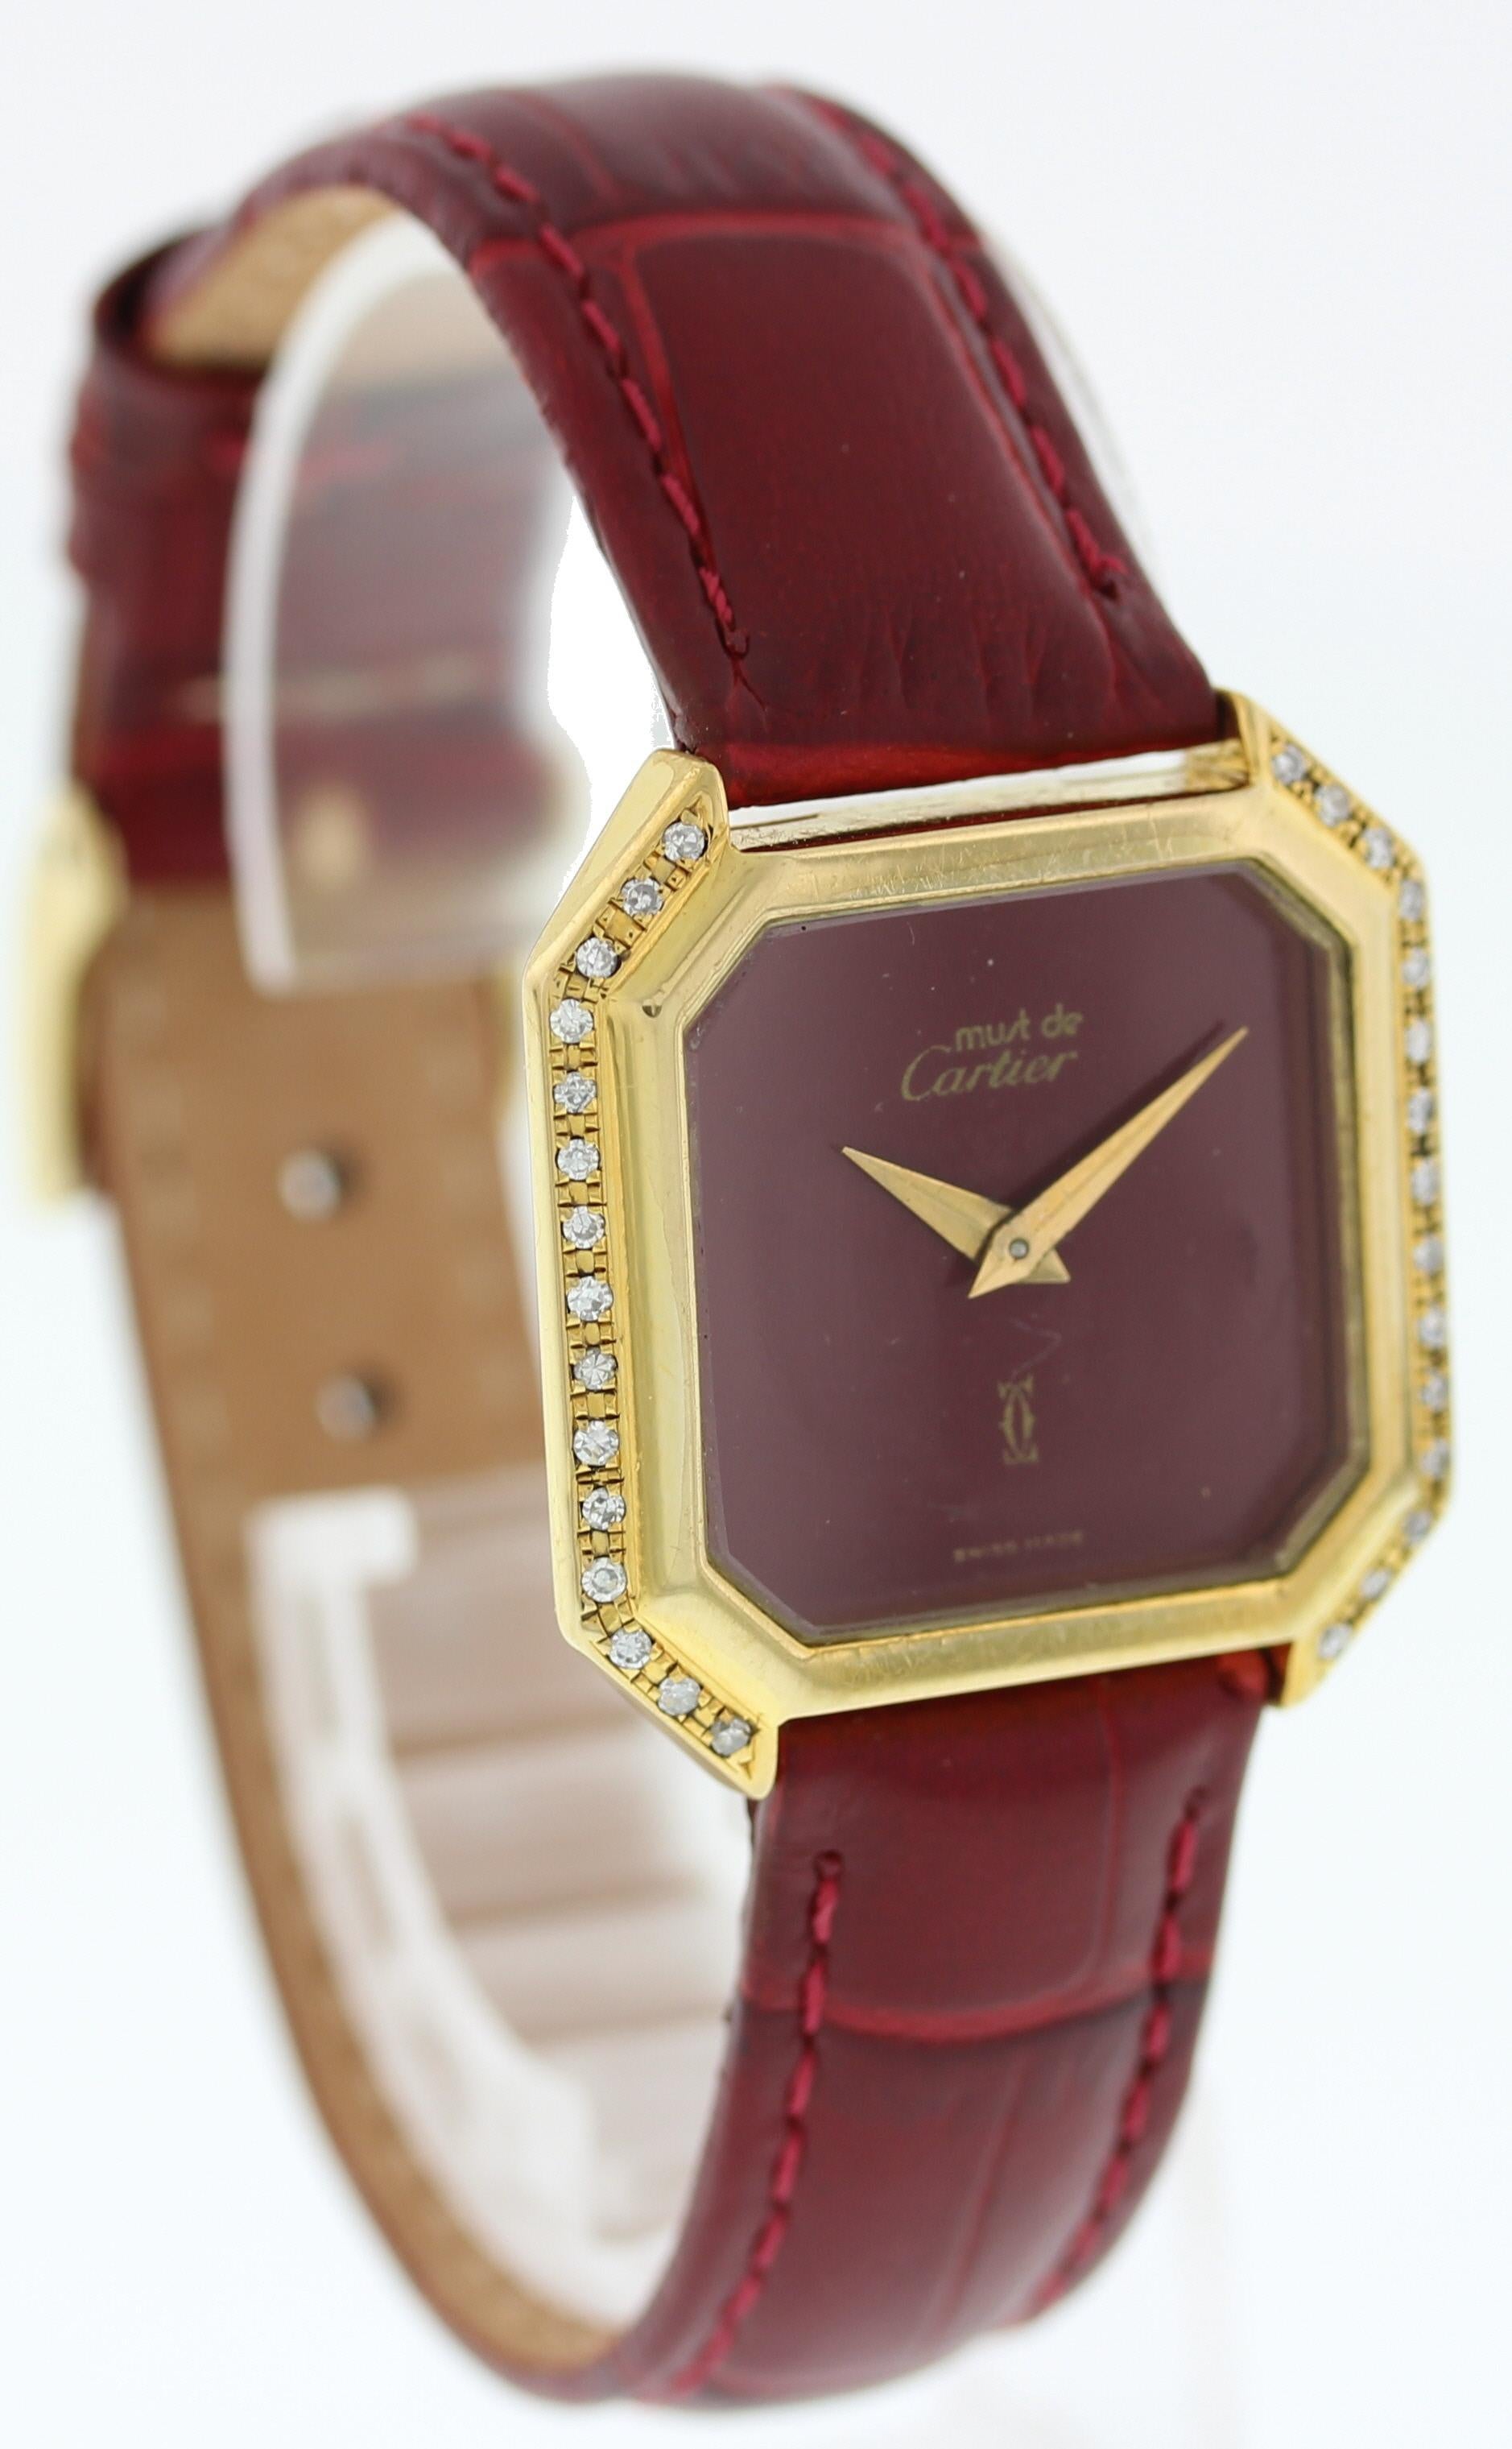 Ladies Vintage Must de Cartier. 27mm electroplated 18k Gold case with custom set diamonds. Red dial and gold hands. Red leather band with gold toned buckle clasp. 

This watch is backed by our one year warranty.